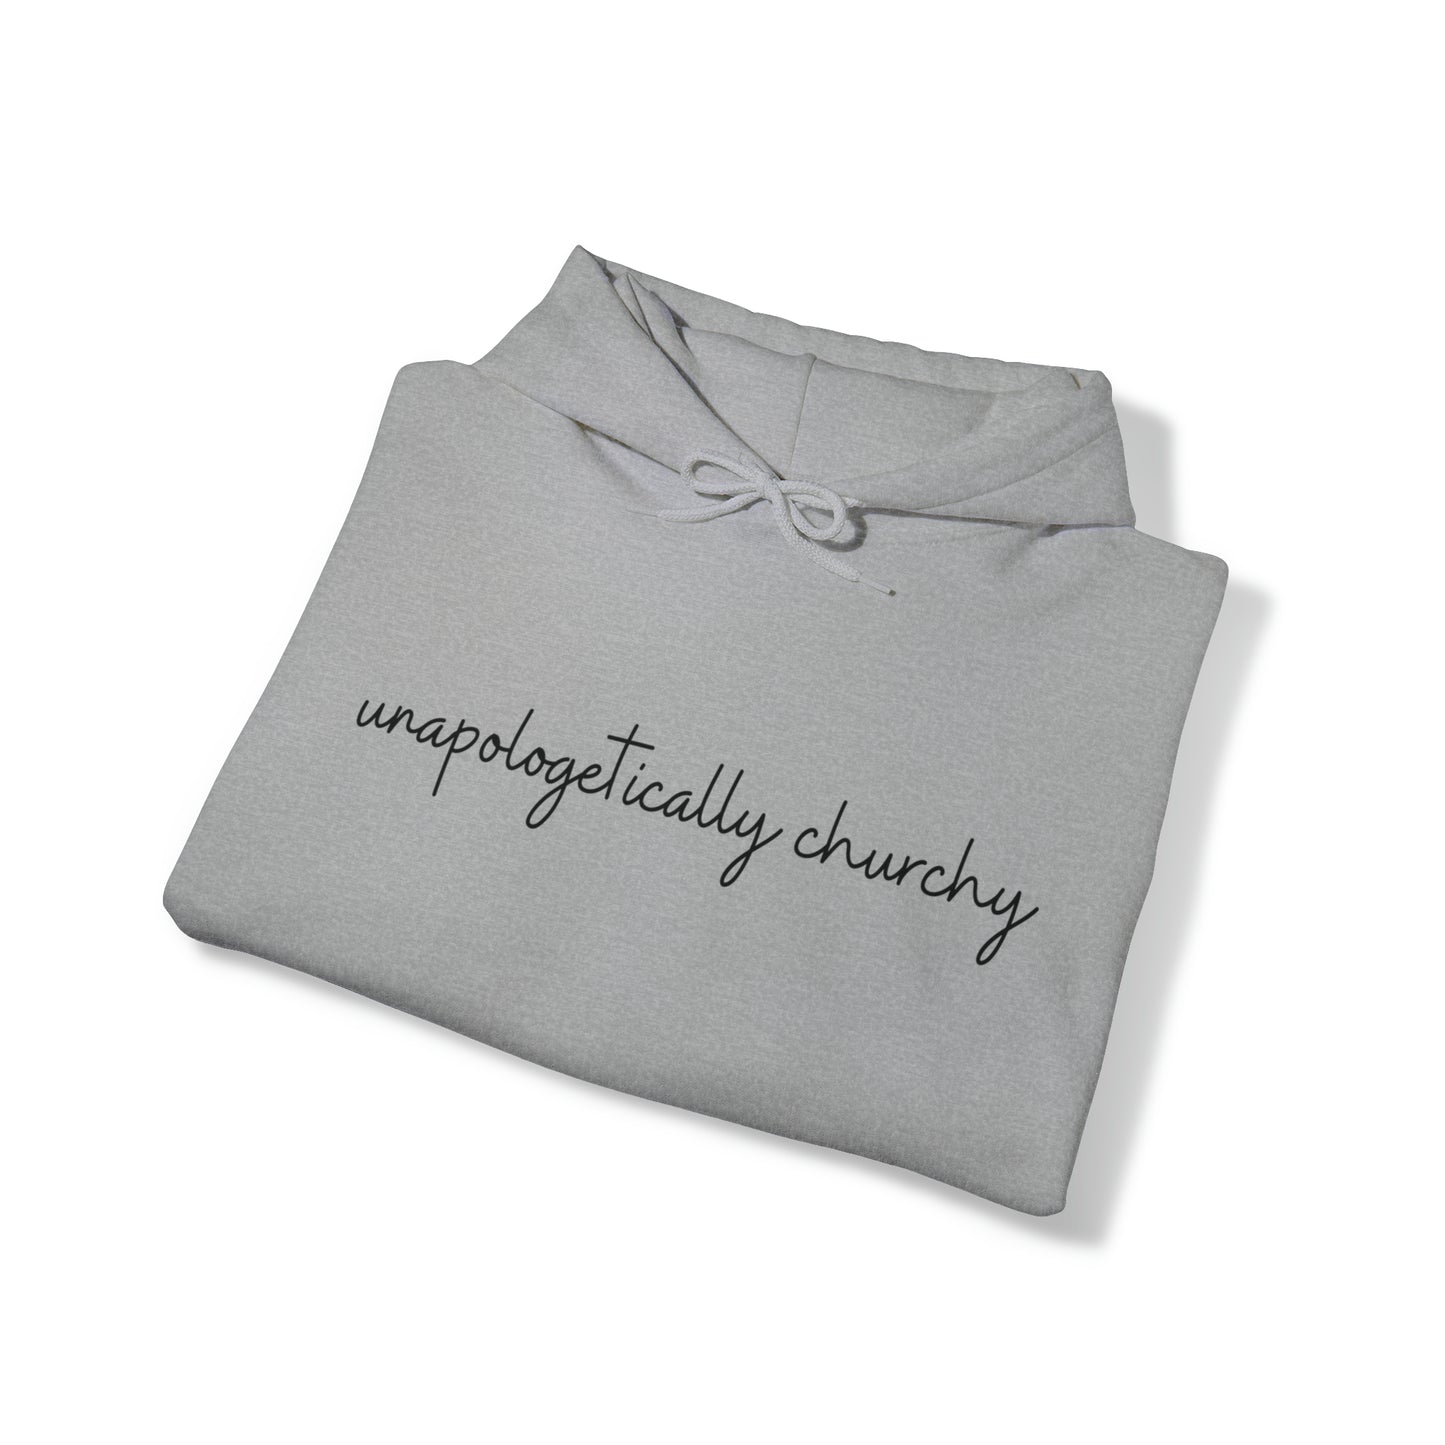 Unapologetically Churchy -Hoodie